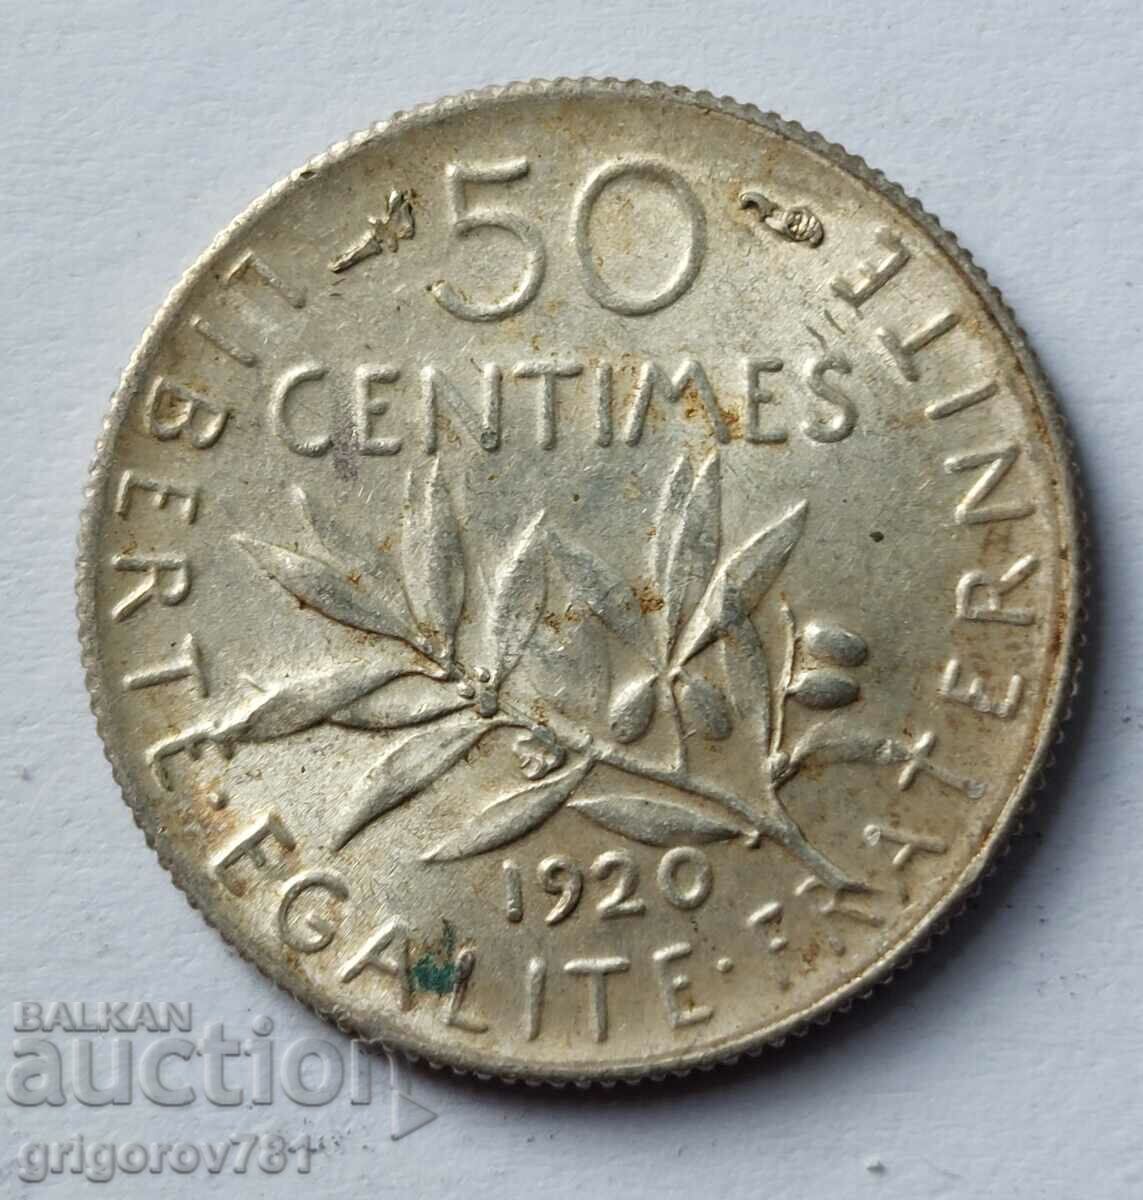 50 centimes silver France 1920 - silver coin №29